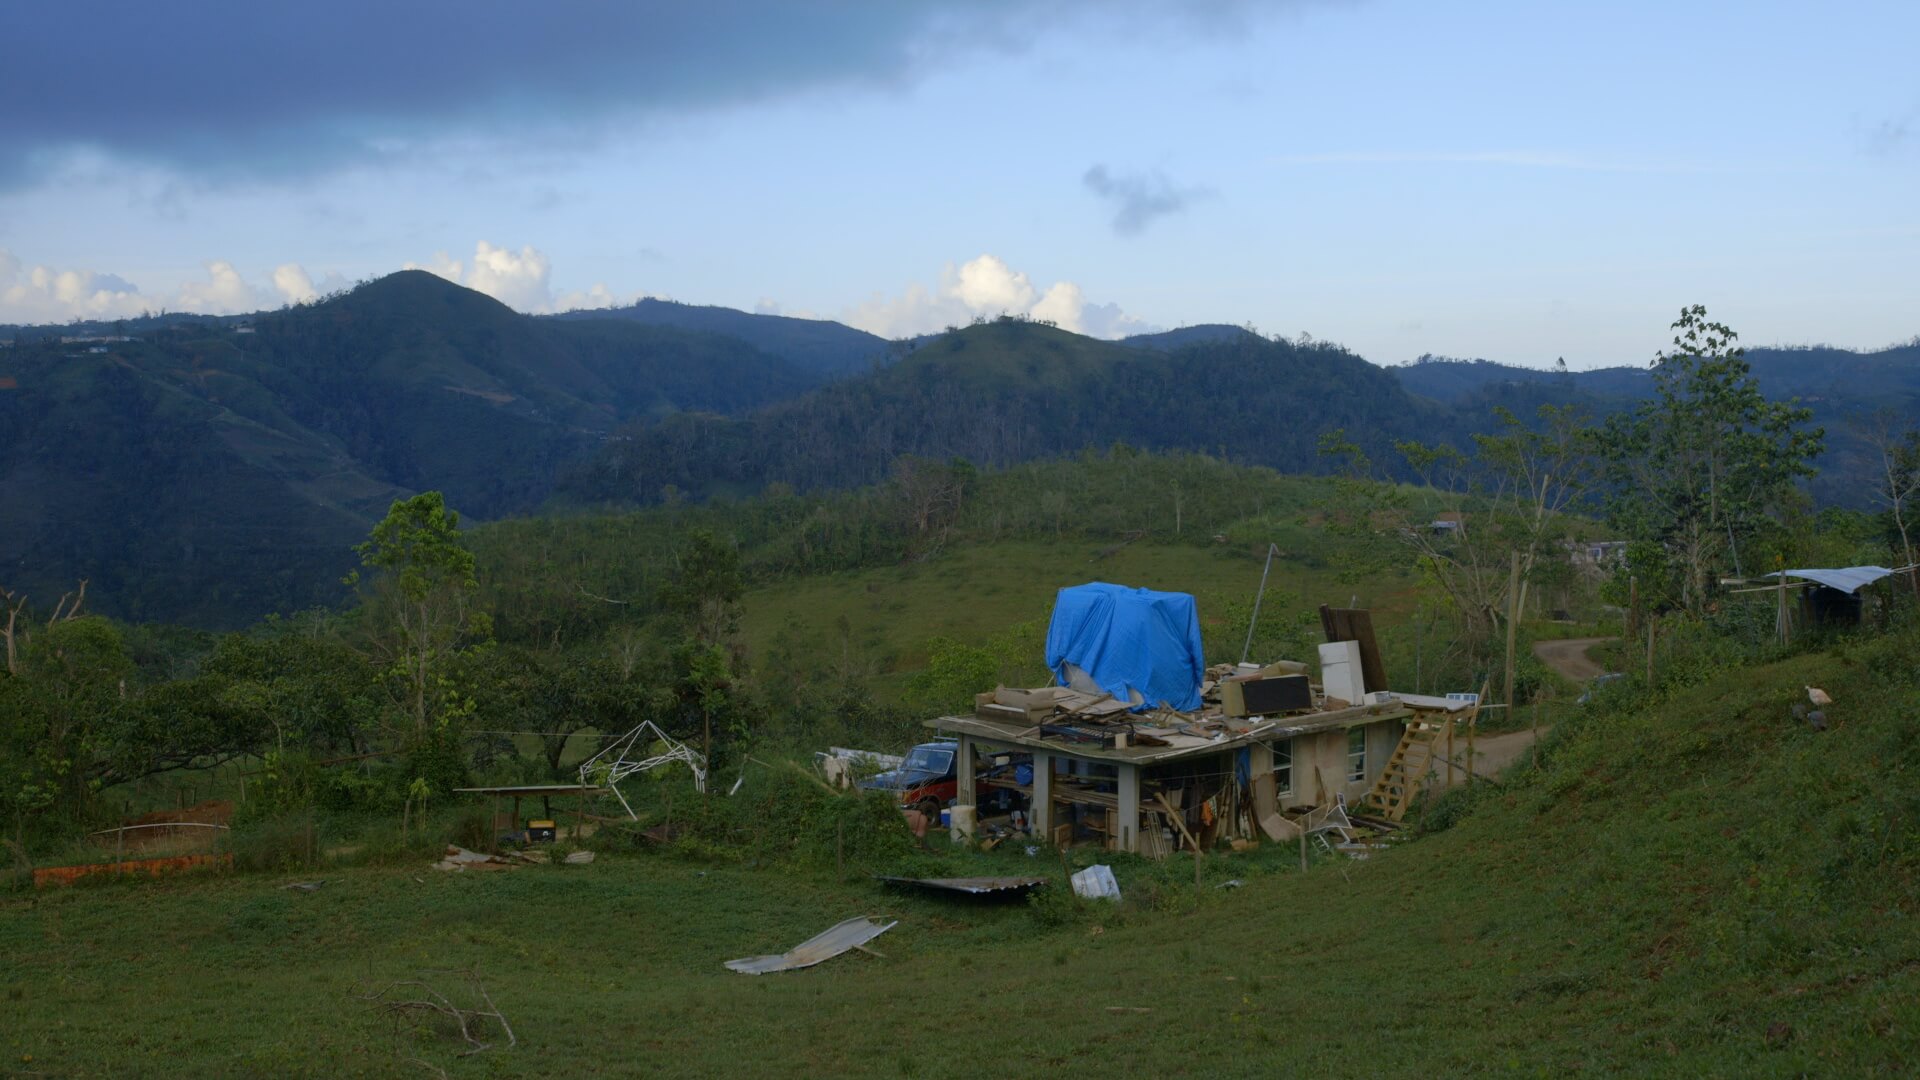 Still from Landfall. Full shot of a green landscape with mountains in the background. On the right, there is a house with a wooden pillar front porch and a pickup truck is parked to the side of the house.